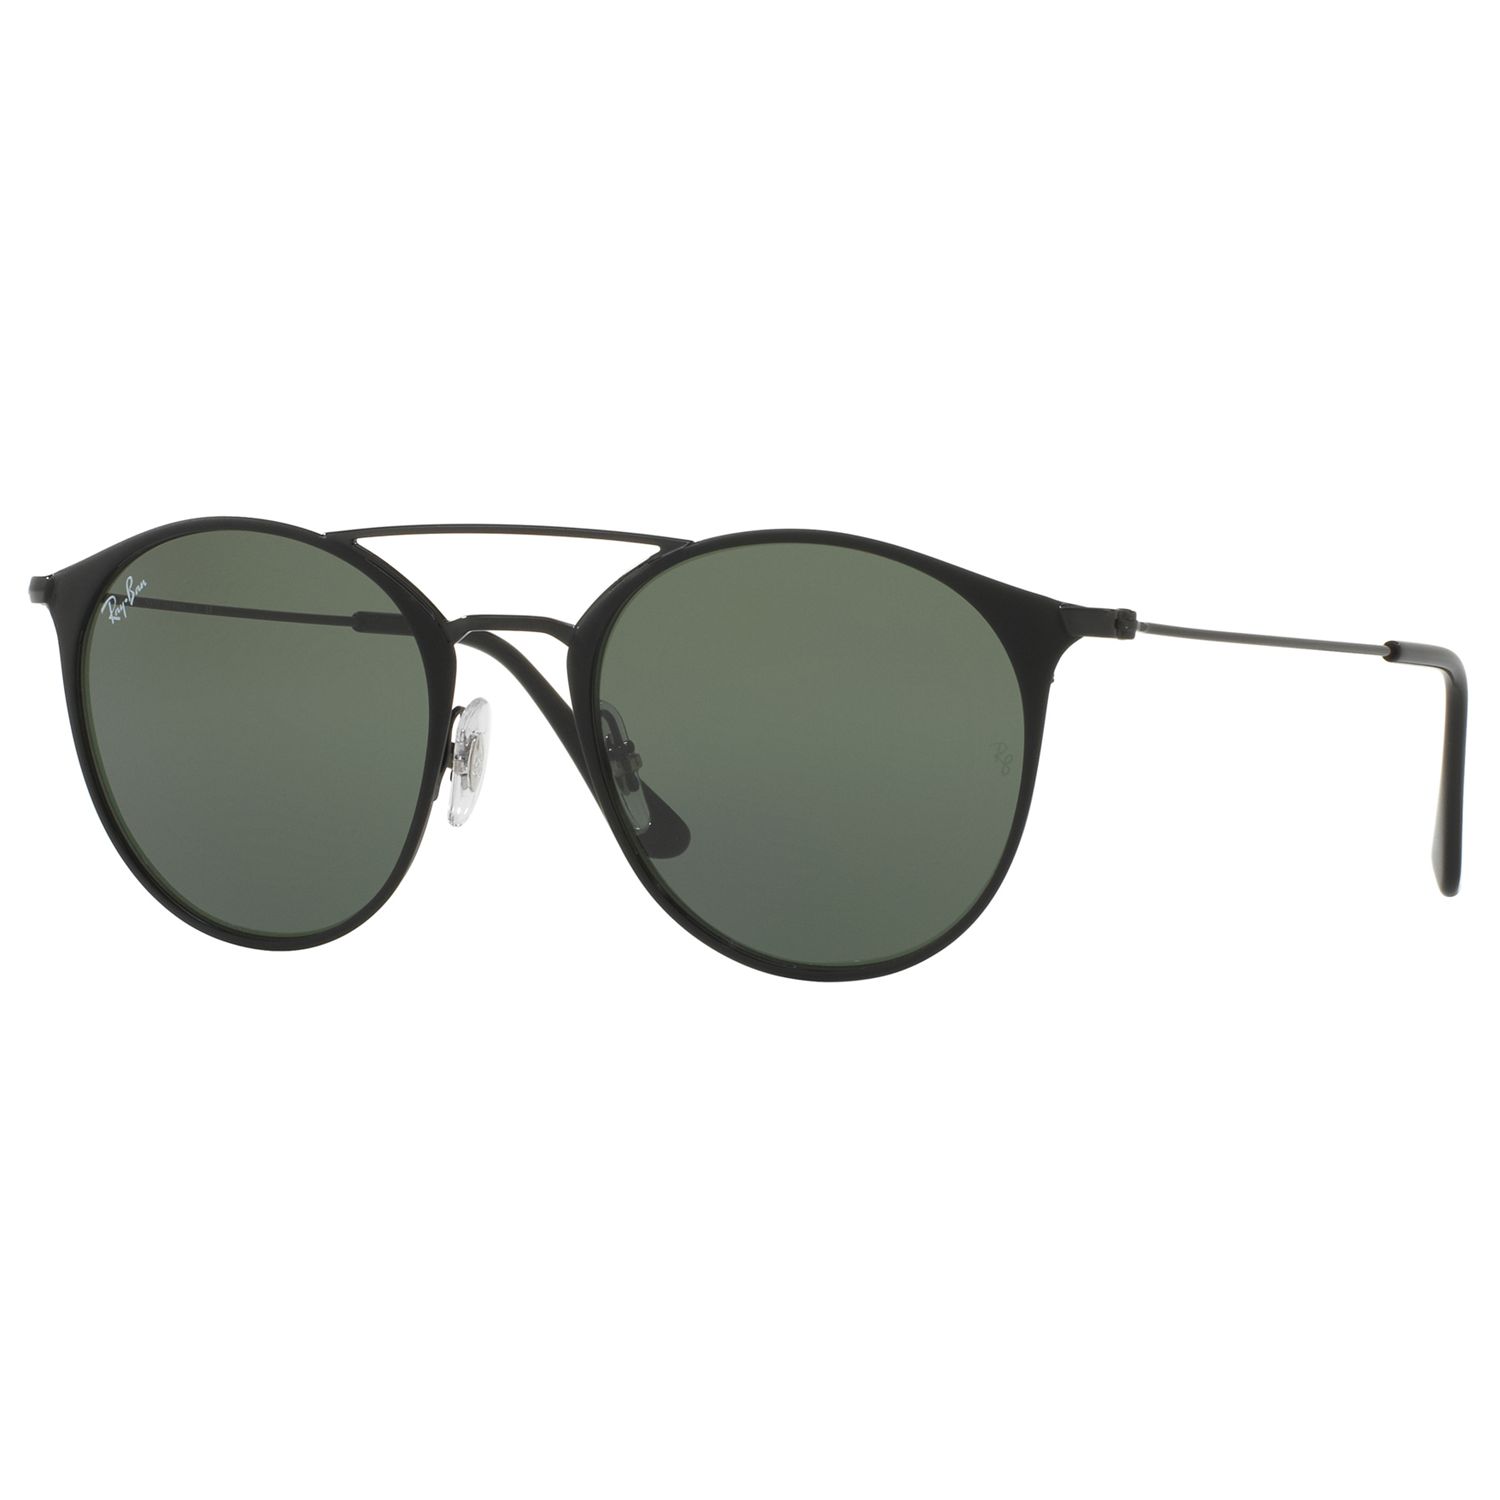 Ray-Ban RB3546 Oval Sunglasses at John Lewis & Partners